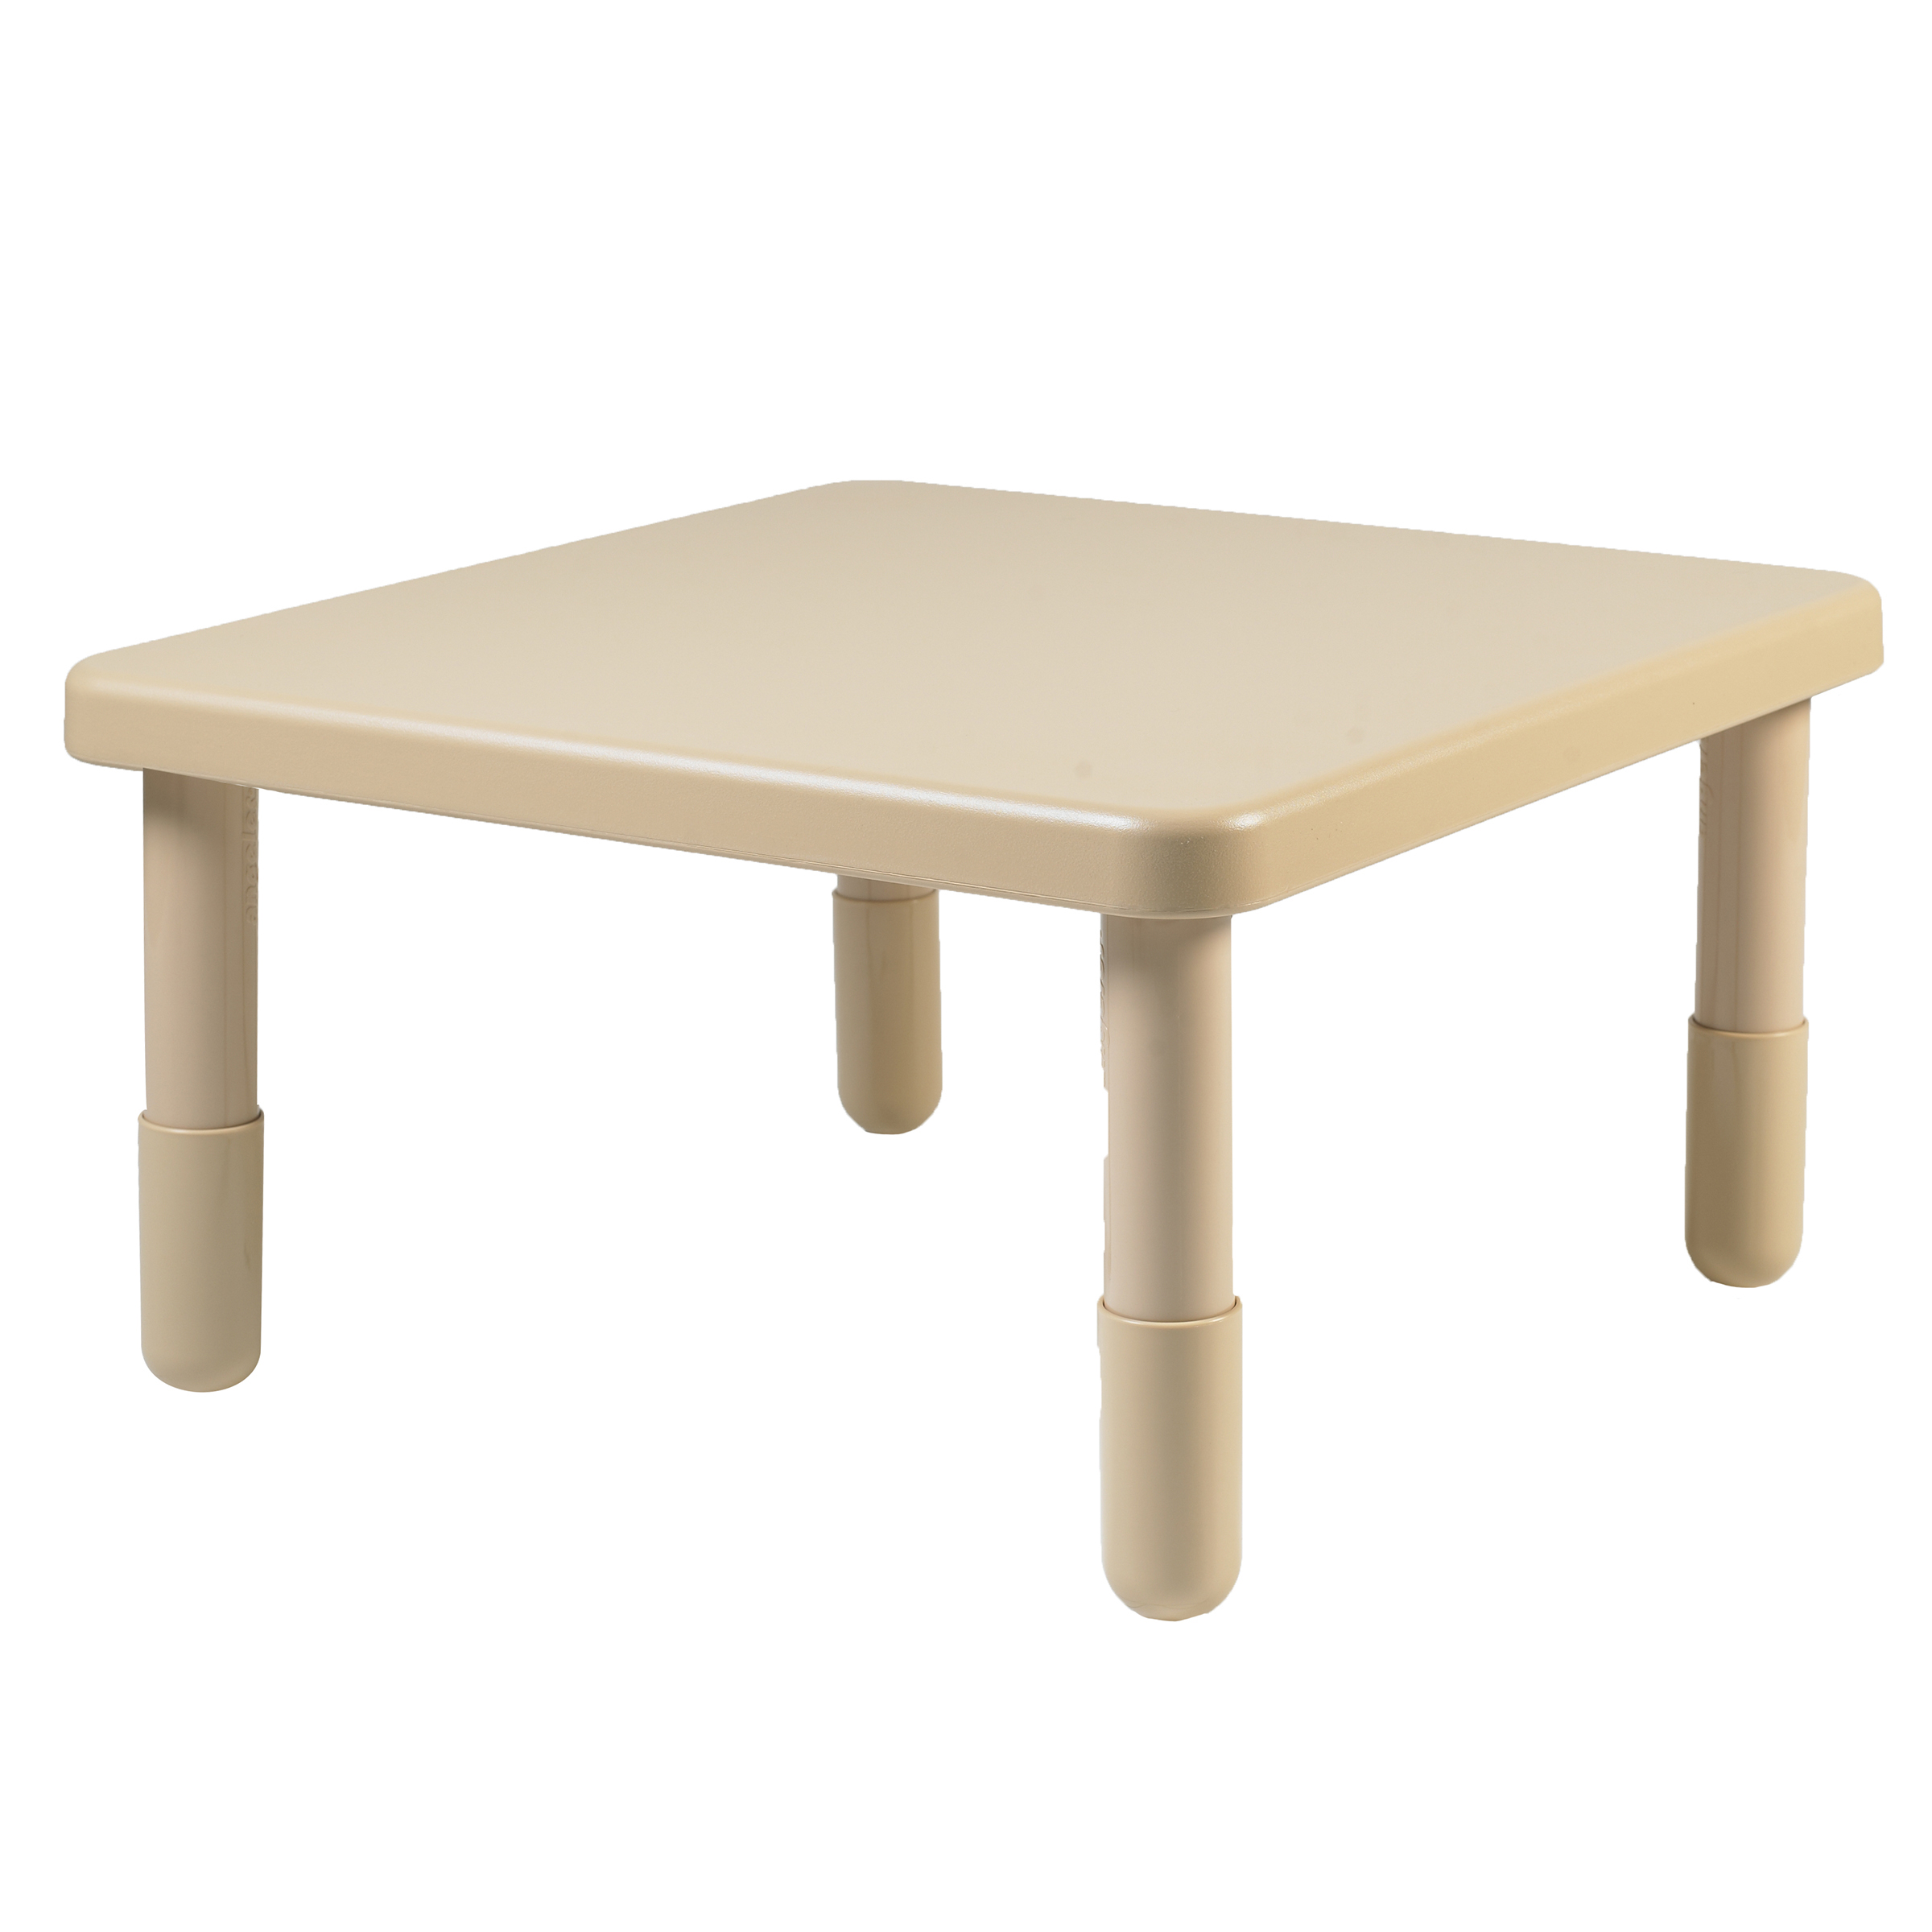 Value 71 cm  Square Table - Natural Tan with 40,5 cm  Legs